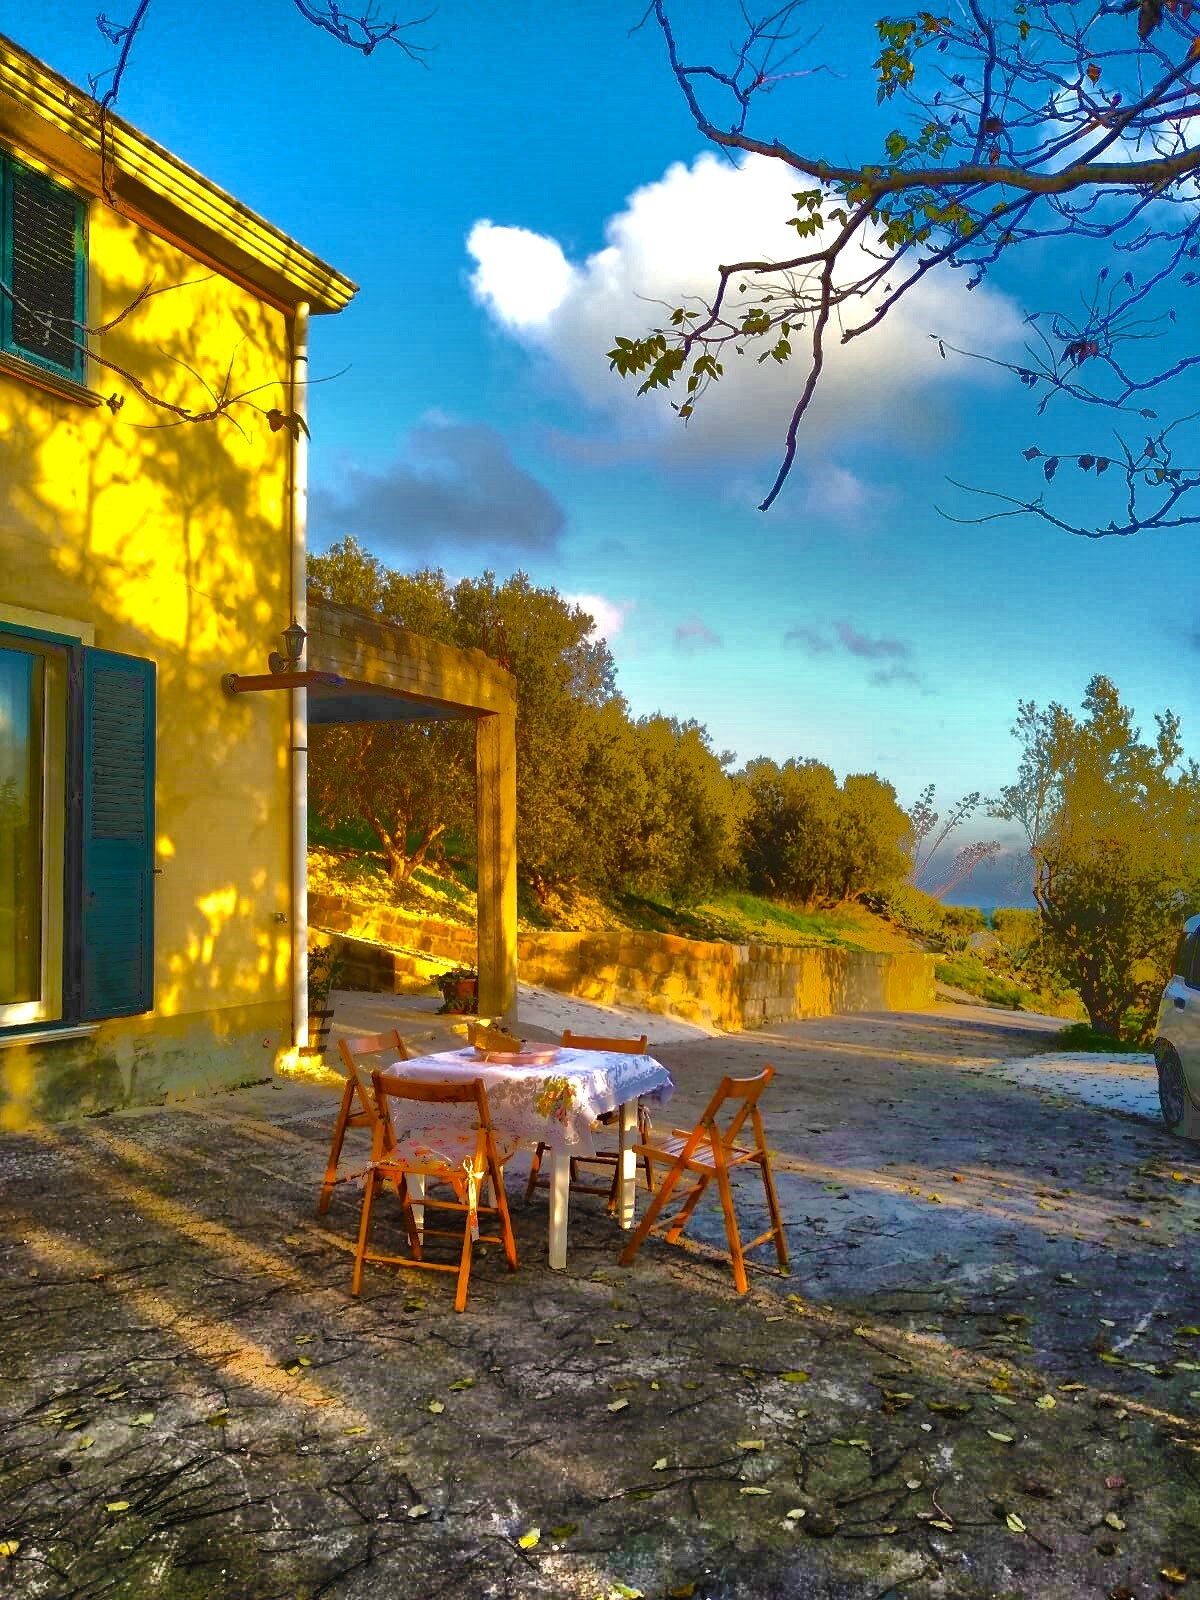 LOVELY COUNTRY HOUSE IN SICILY